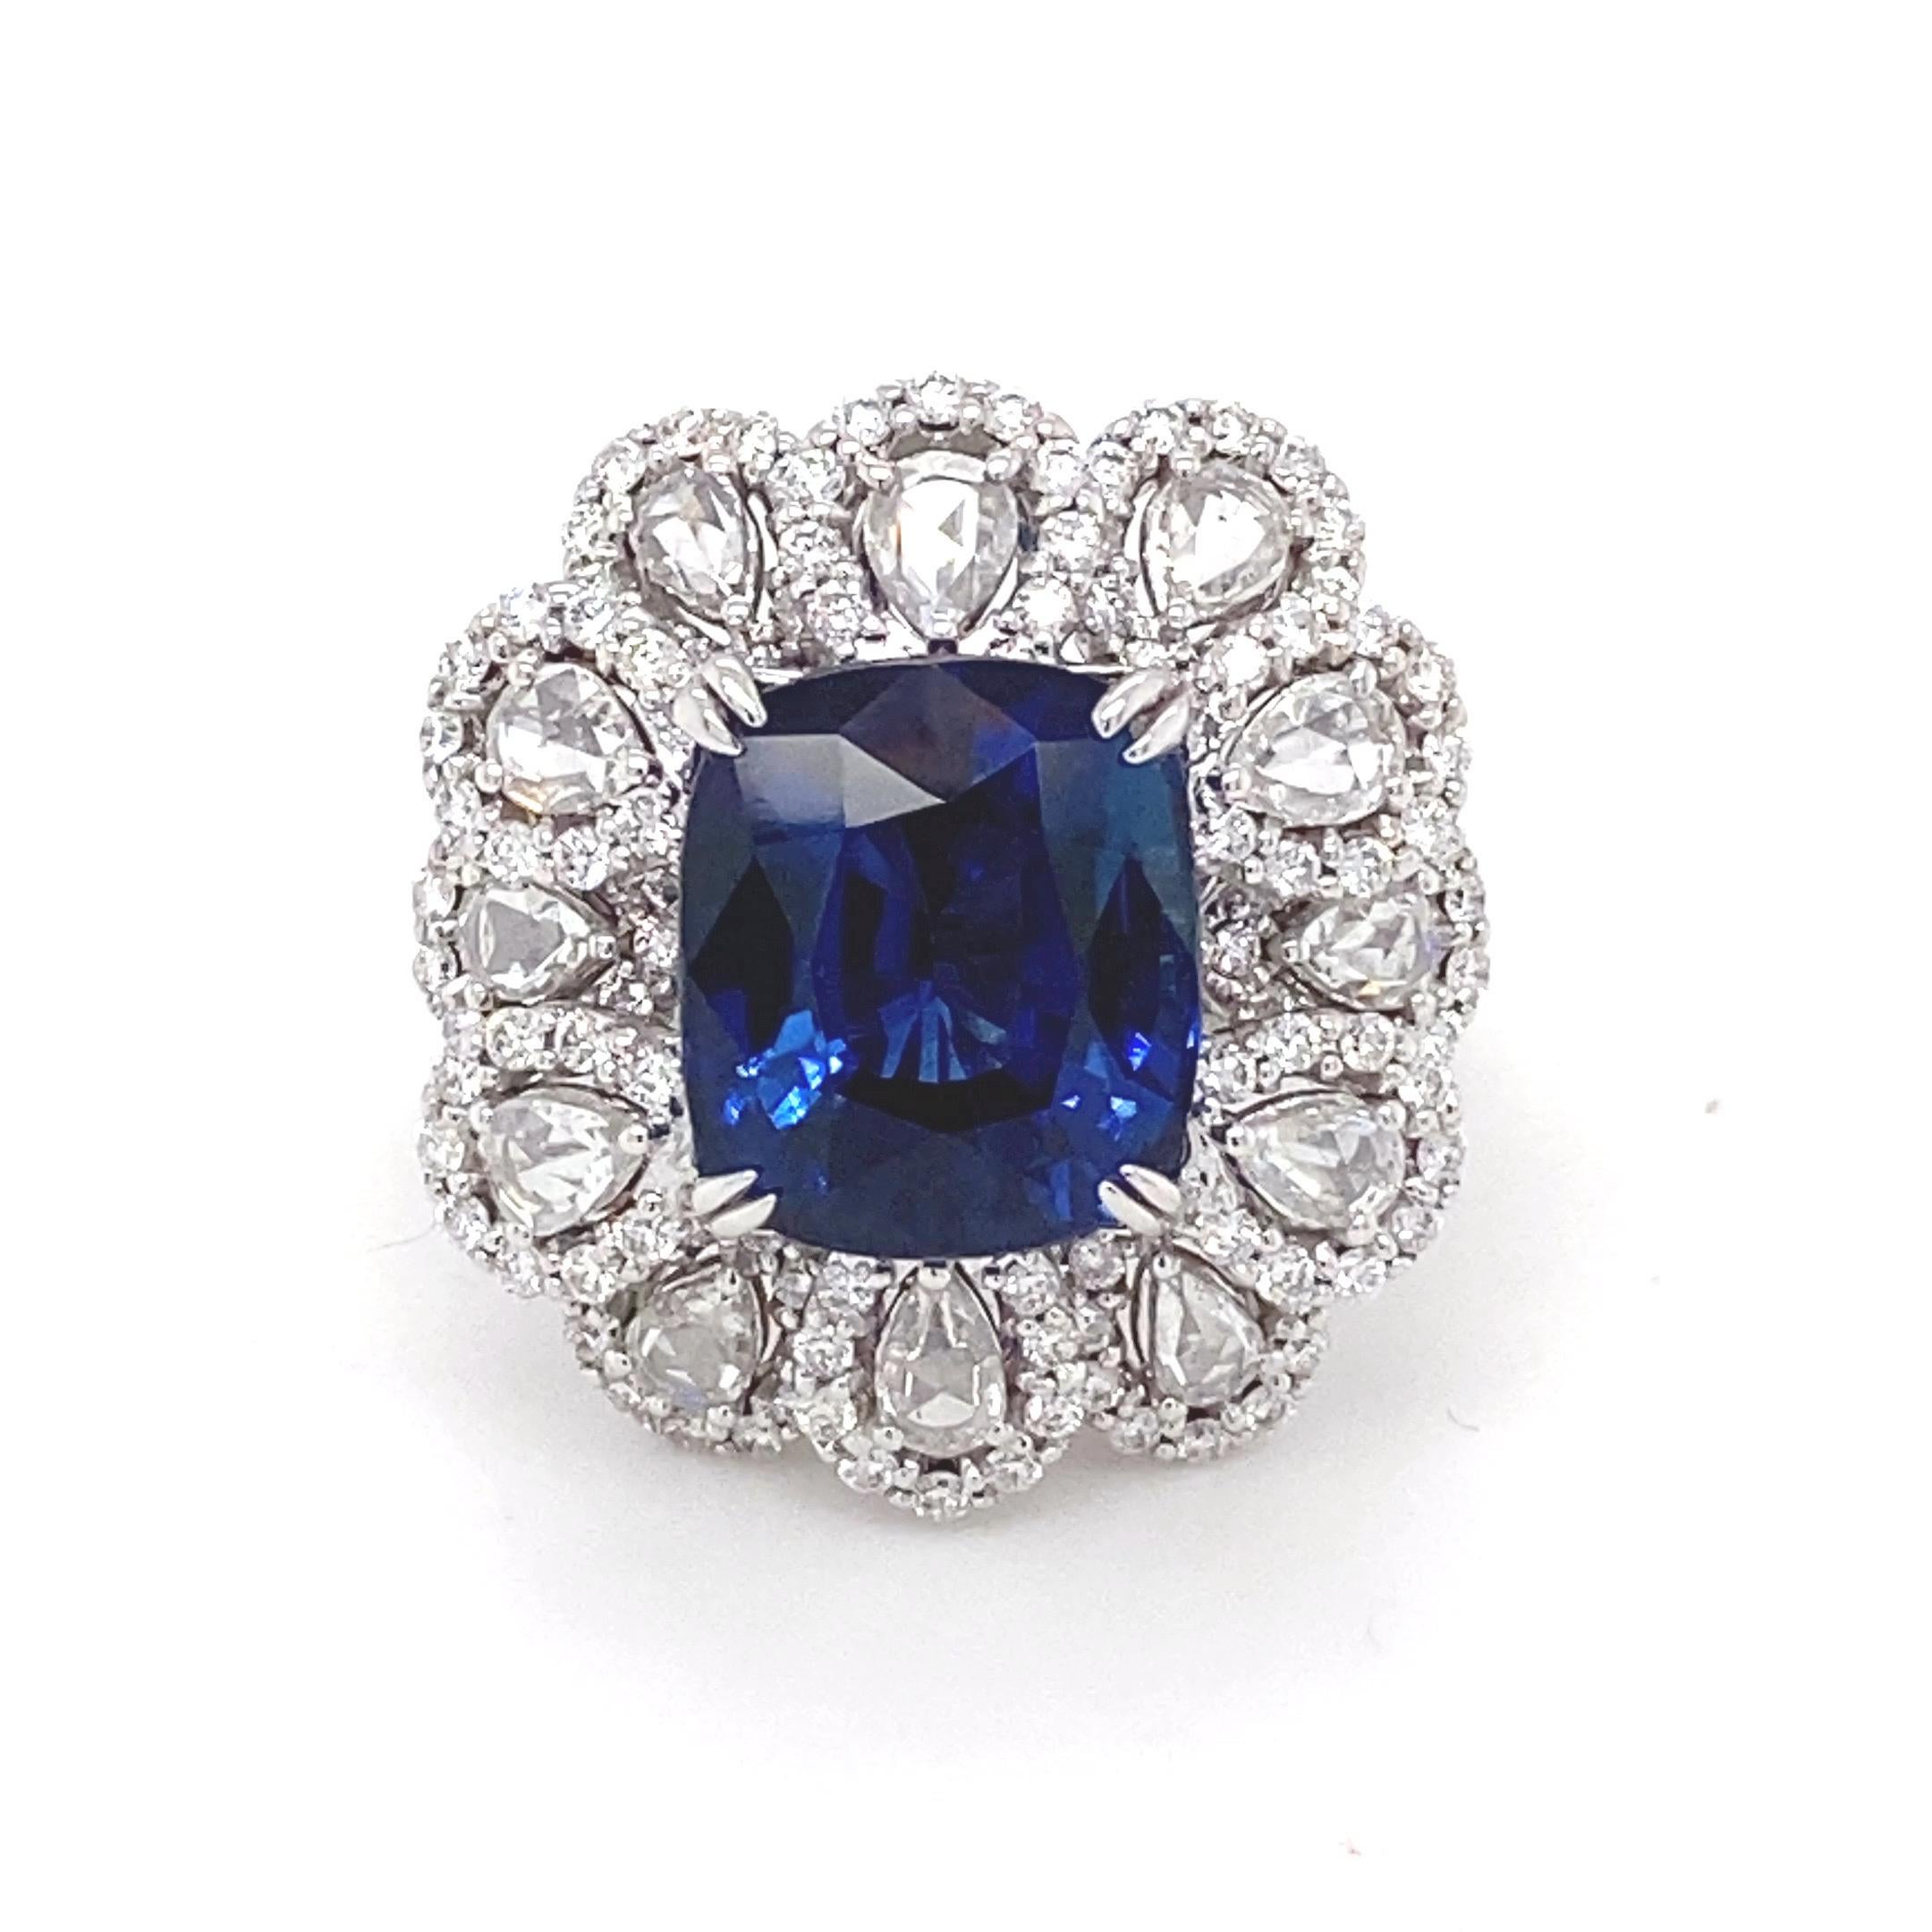 This GIA certified cushion shape blue sapphire and diamond ring is a stunning piece of jewelry! This ring features a gorgeous blue sapphire in the center surrounded by pear and round white diamond   delivering the best design and look possible.